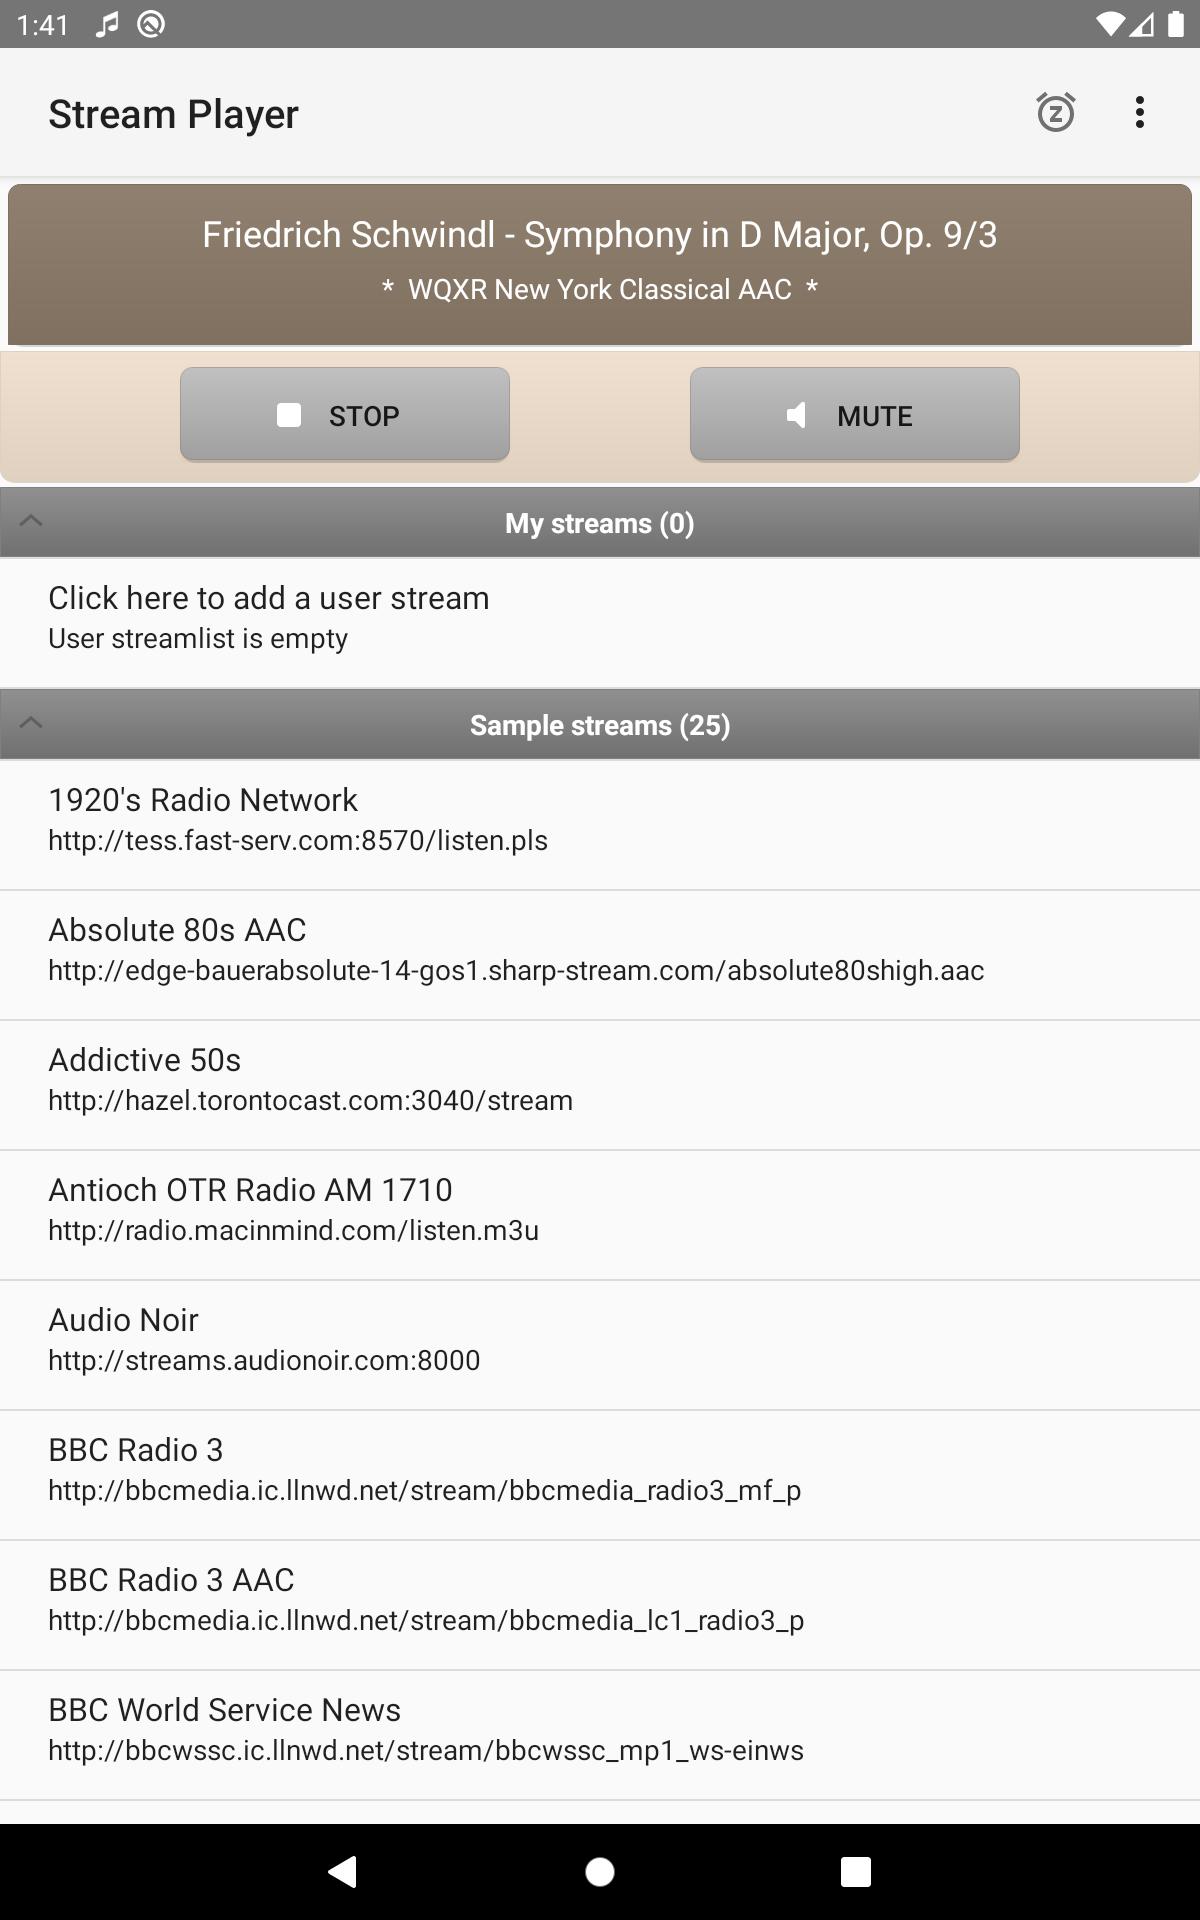 Internet Radio Audio Stream Player for Android - APK Download